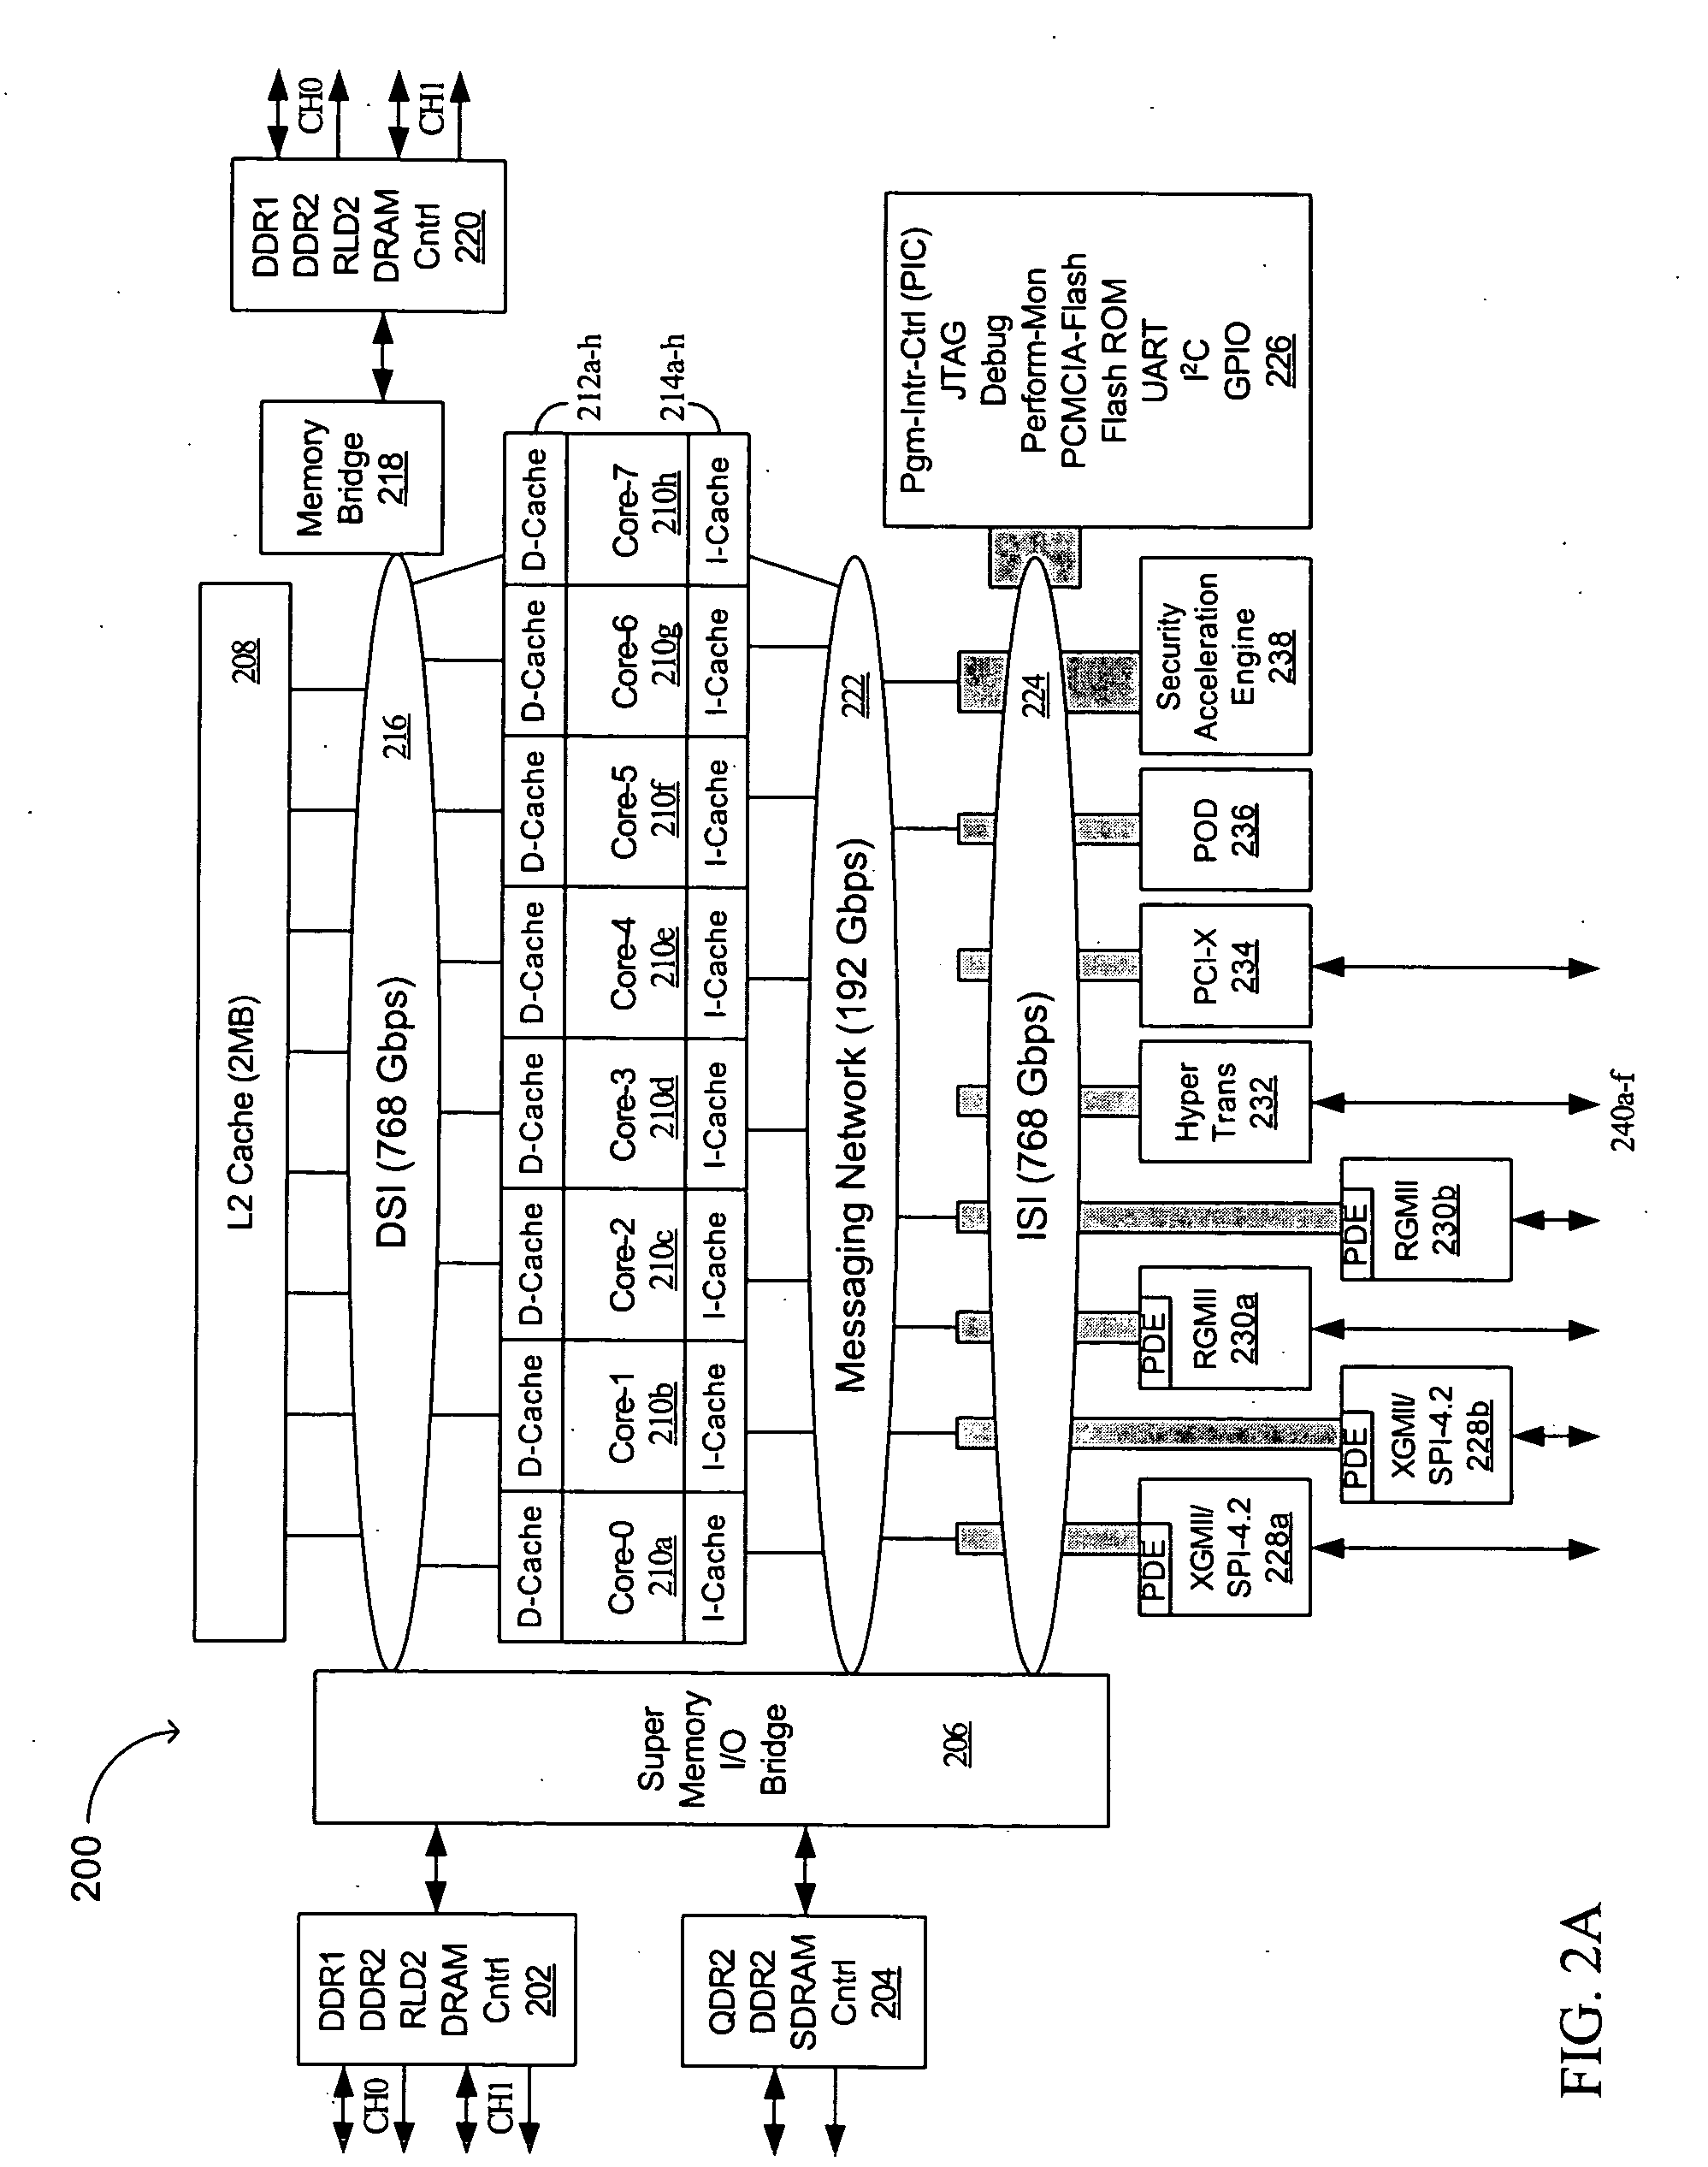 Advanced processor with mechanism for packet distribution at high line rate